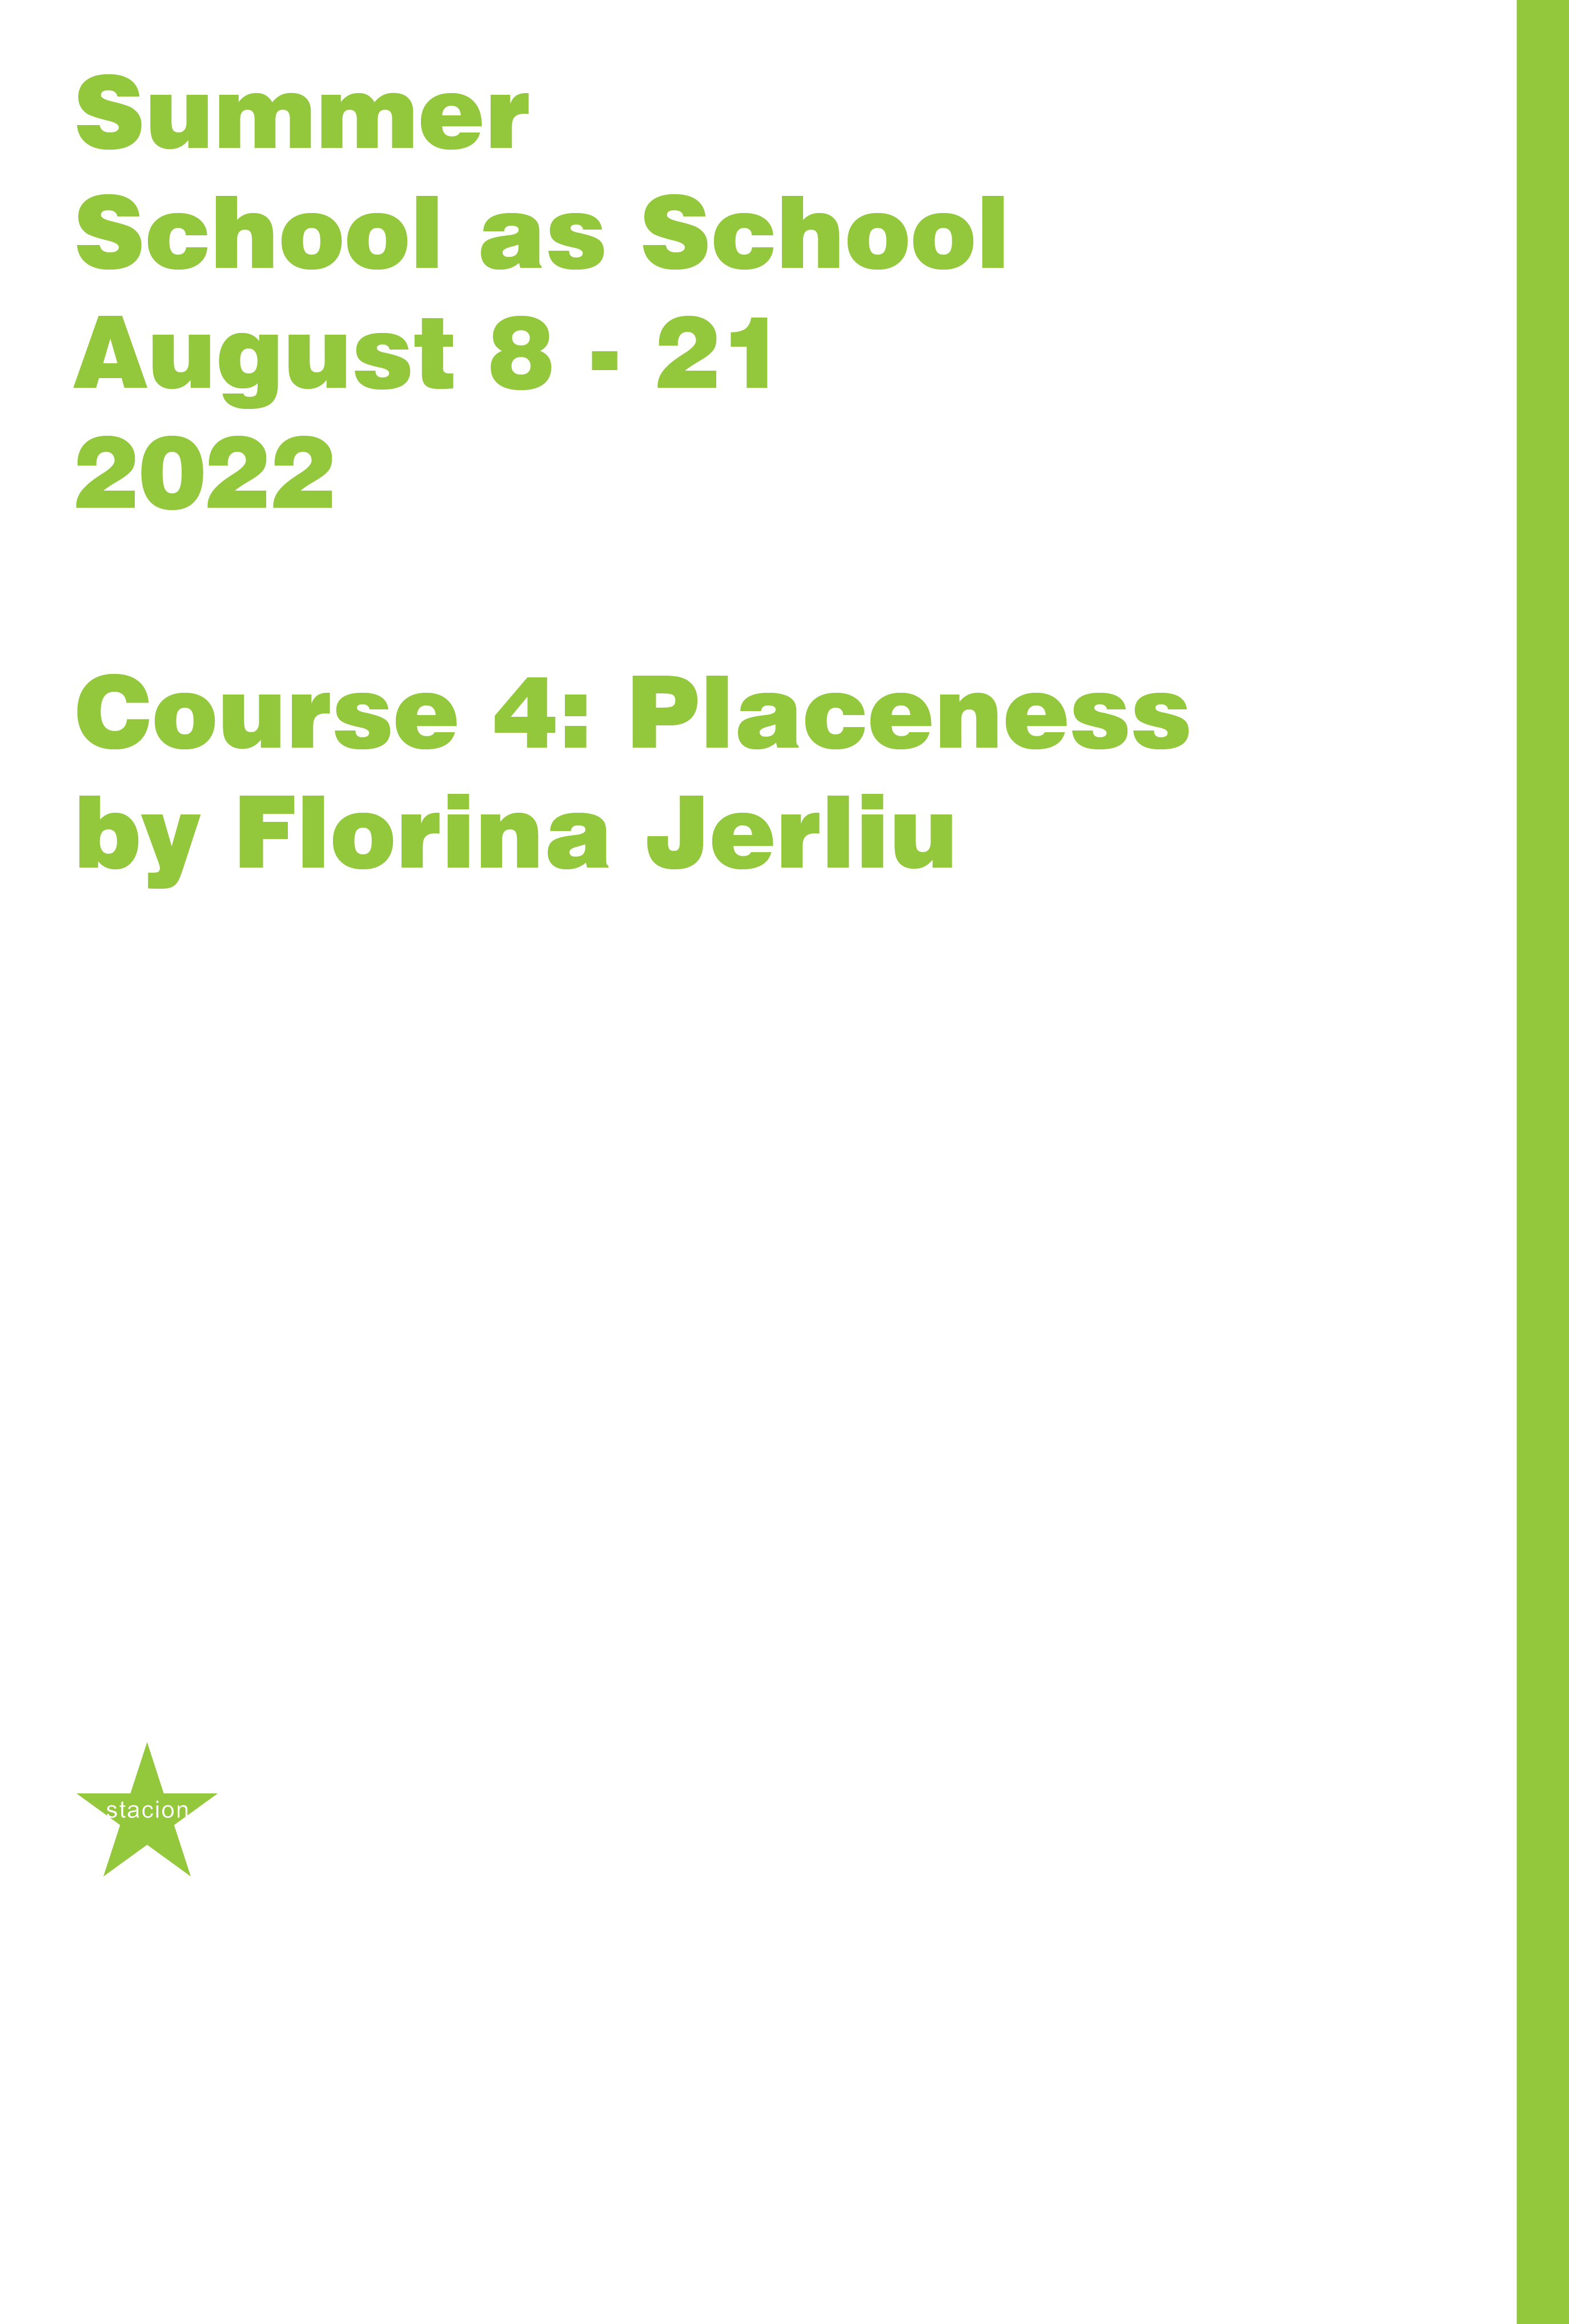 Course 4: Placeness